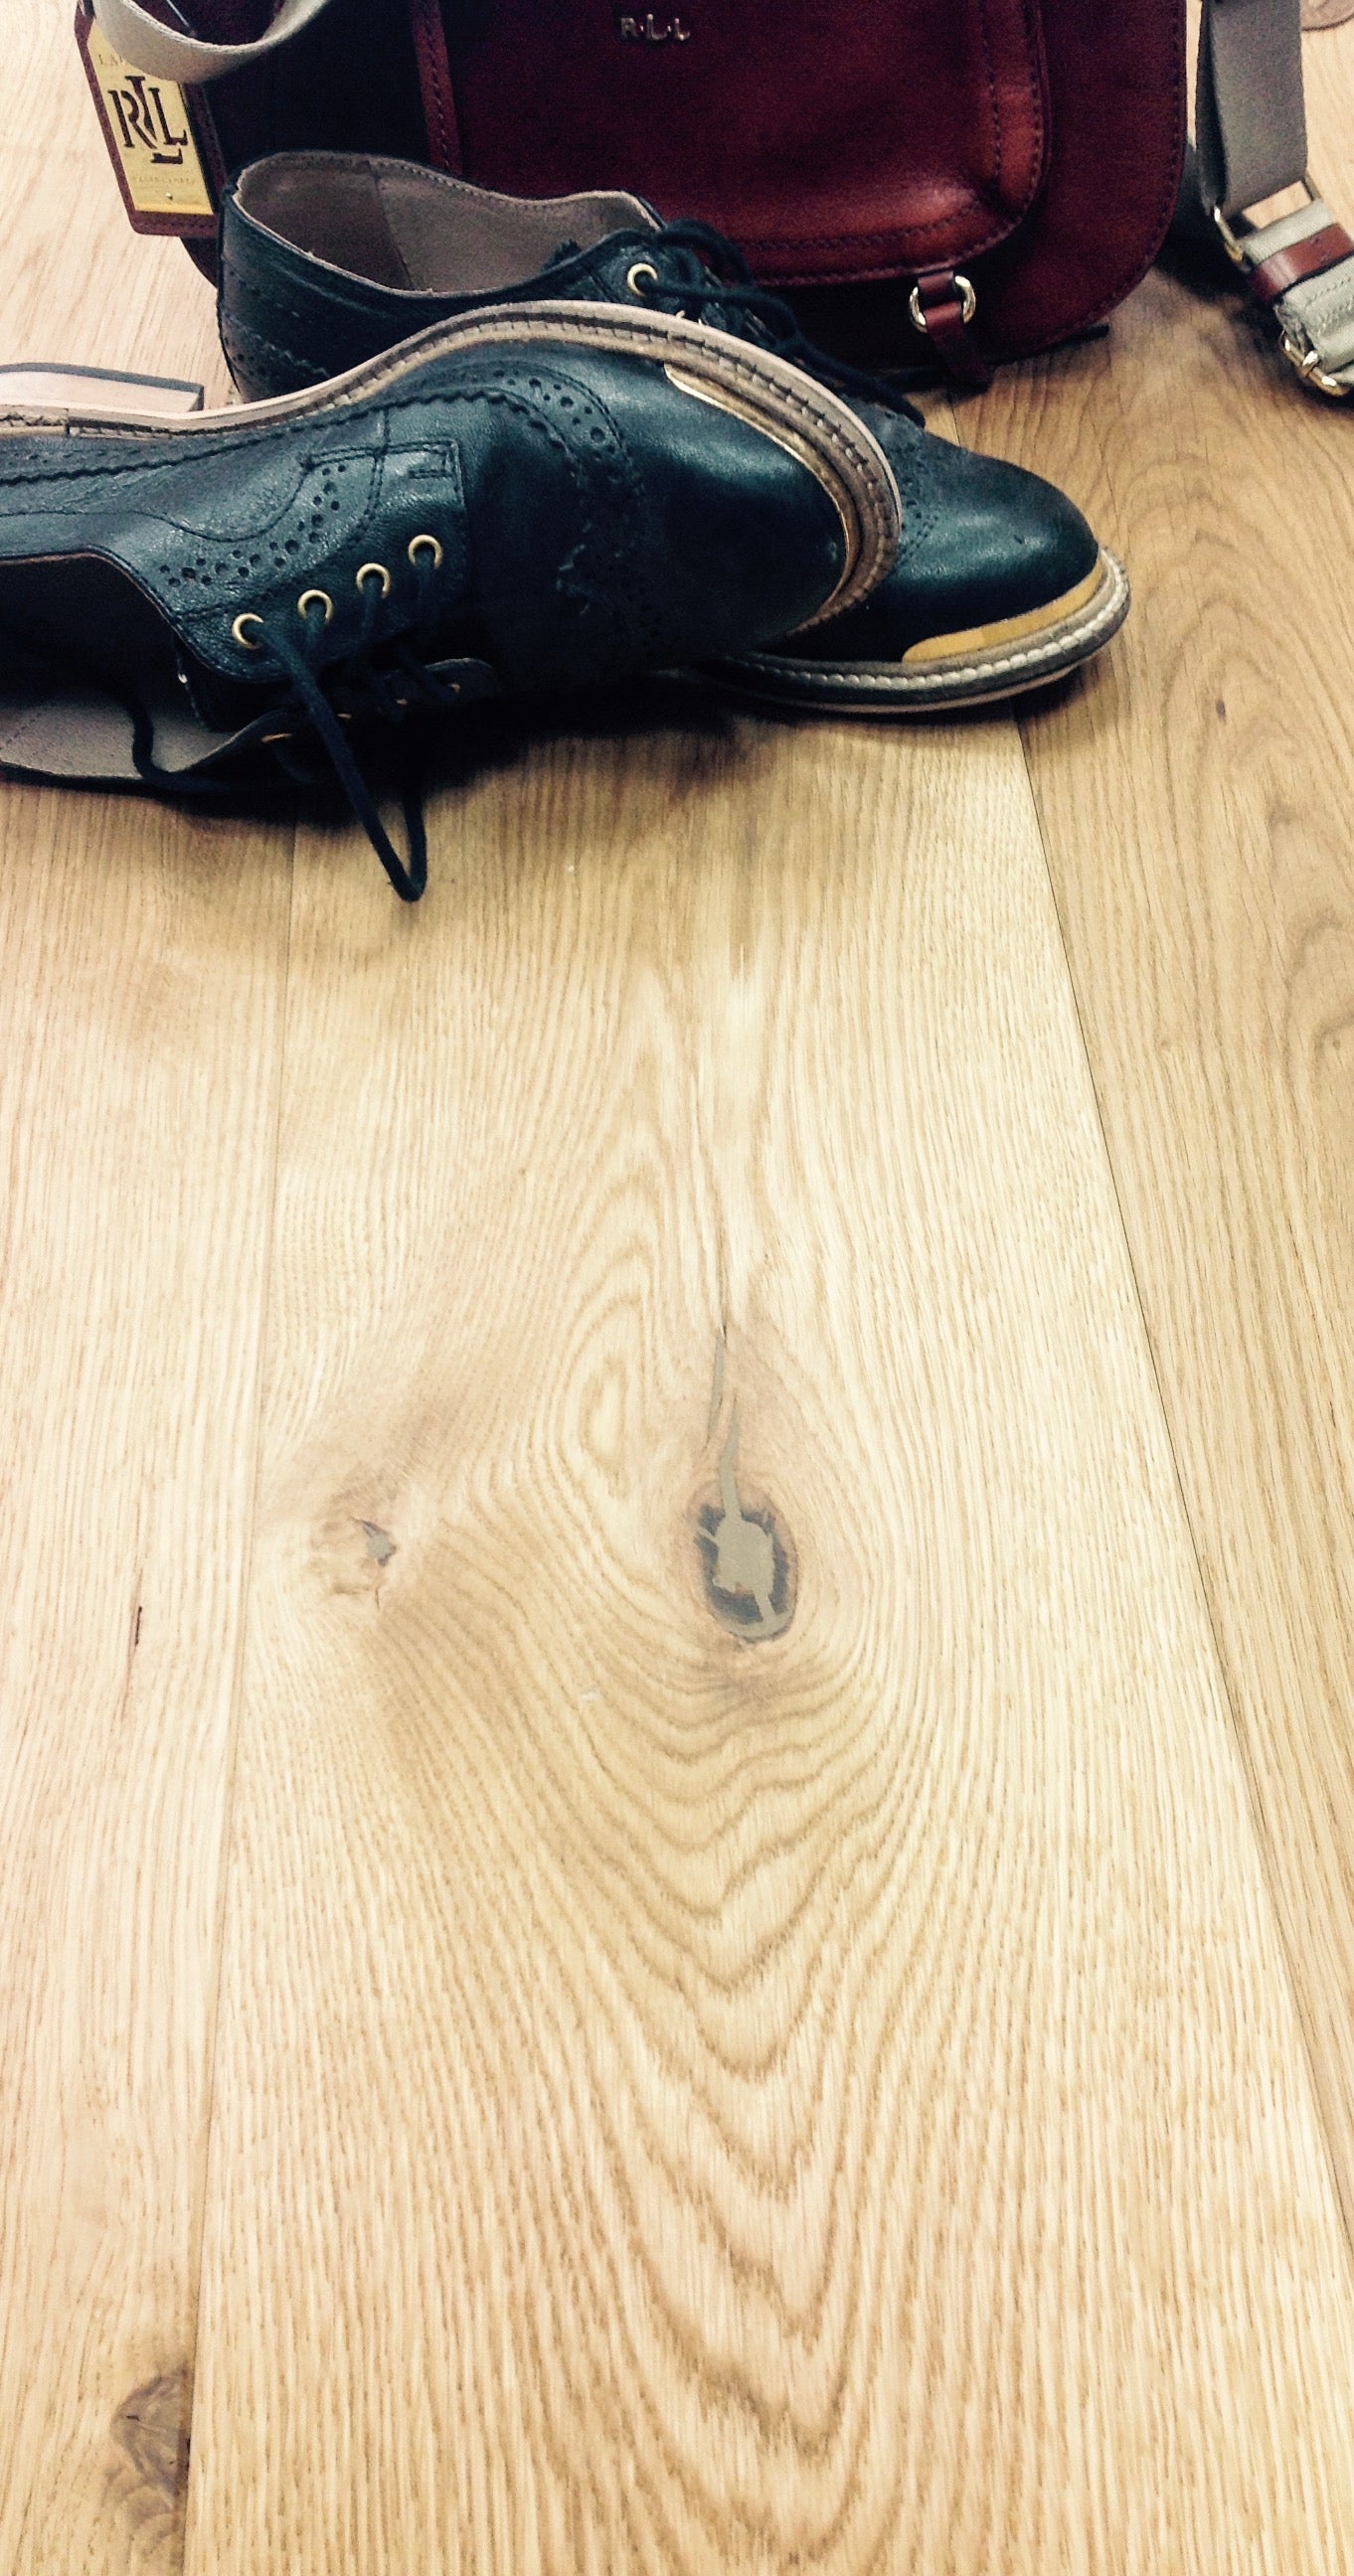 Natural Rustic wood engineered flooring 190mm 2.16sq per pack. Only £49.00sqm